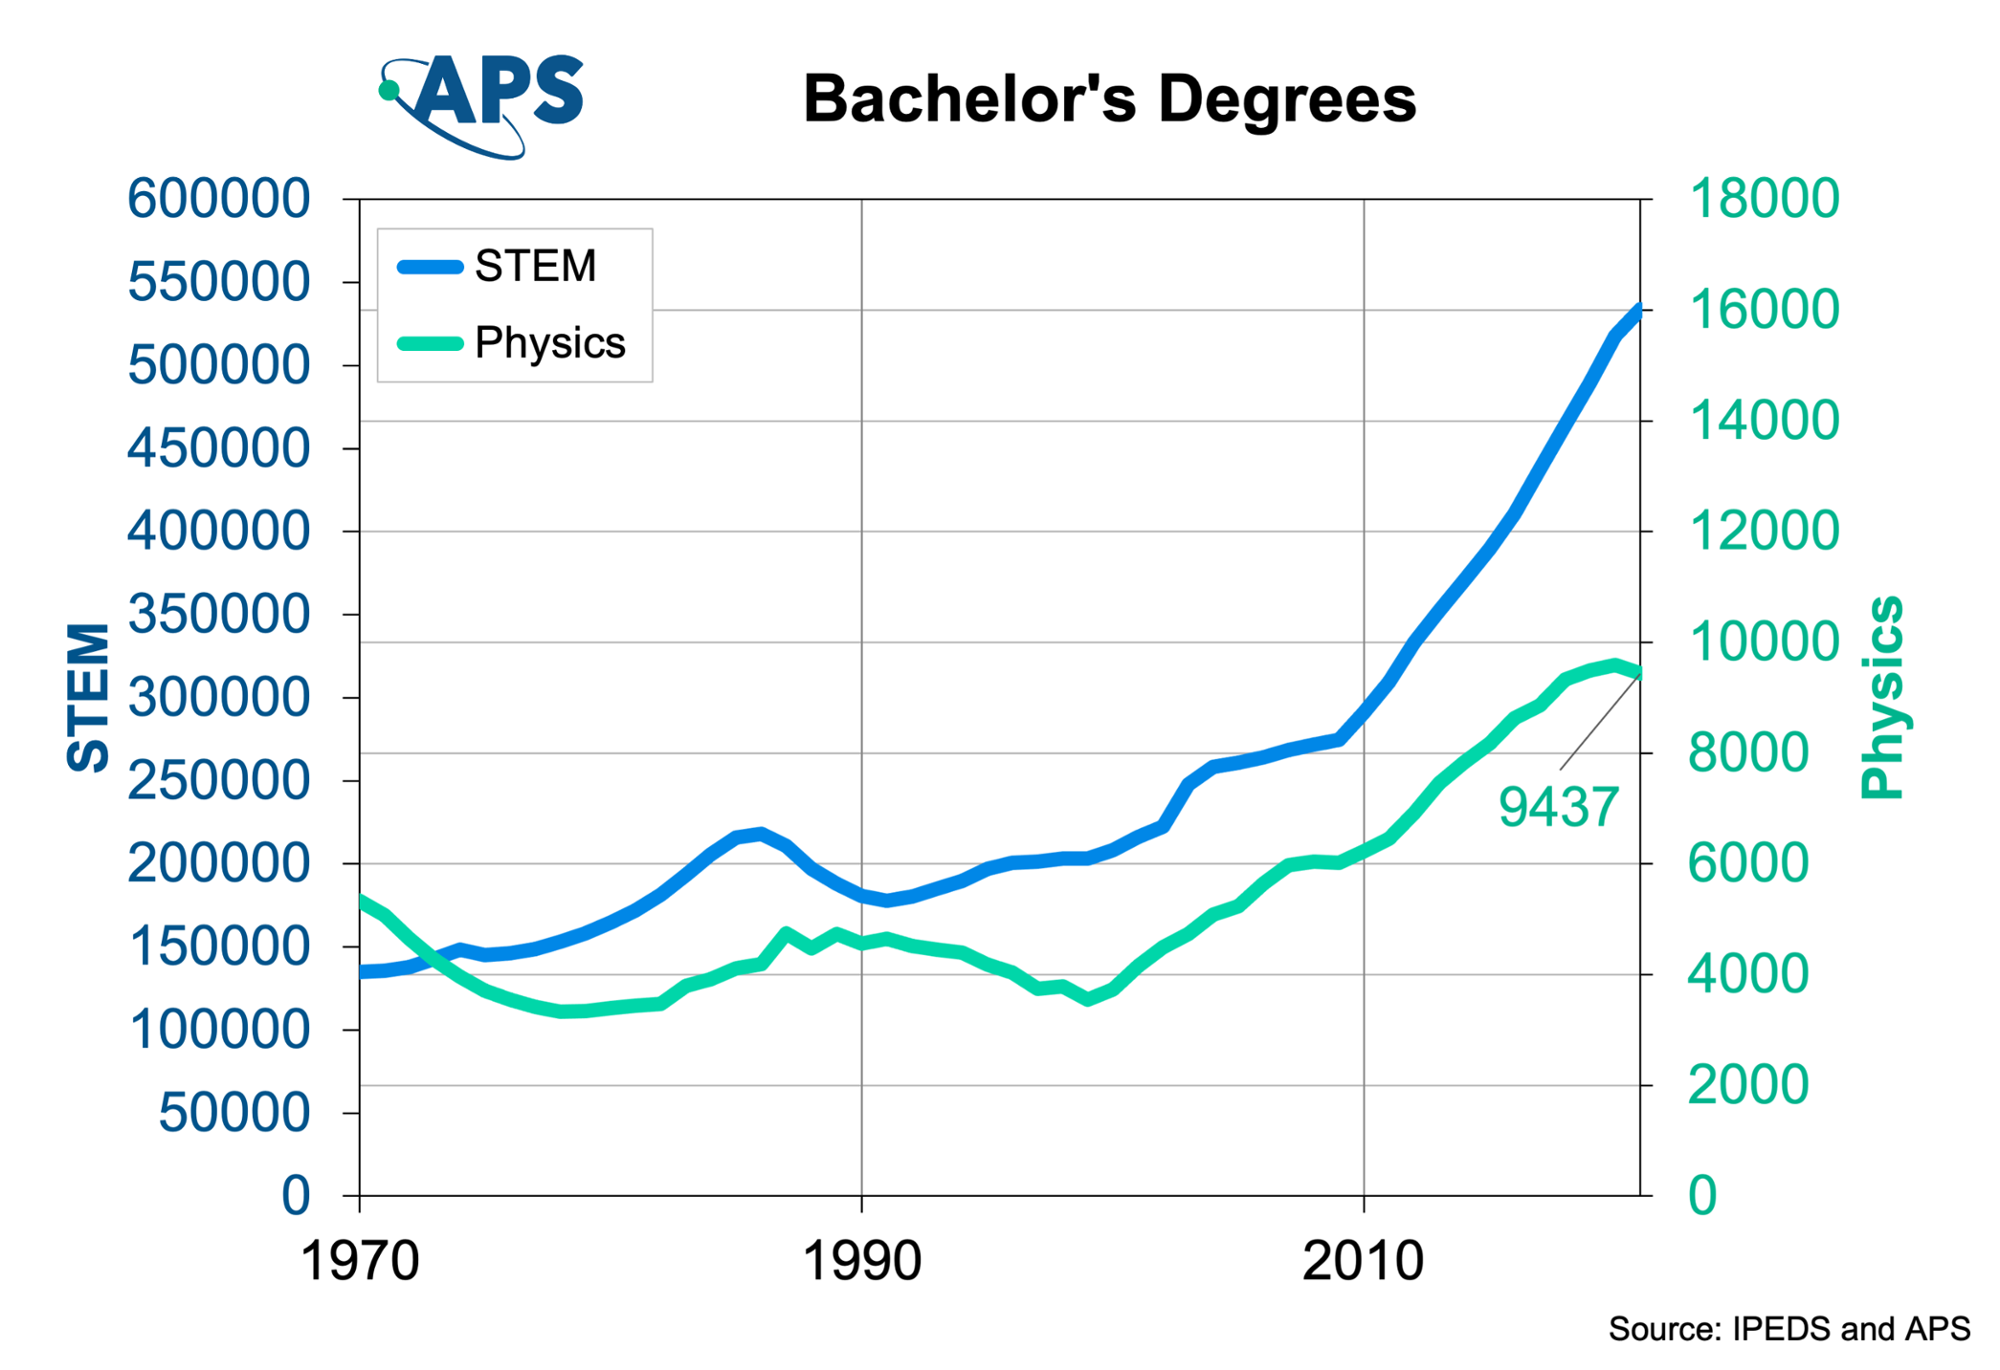 Graph for Bachelor’s Degrees in Physics and STEM